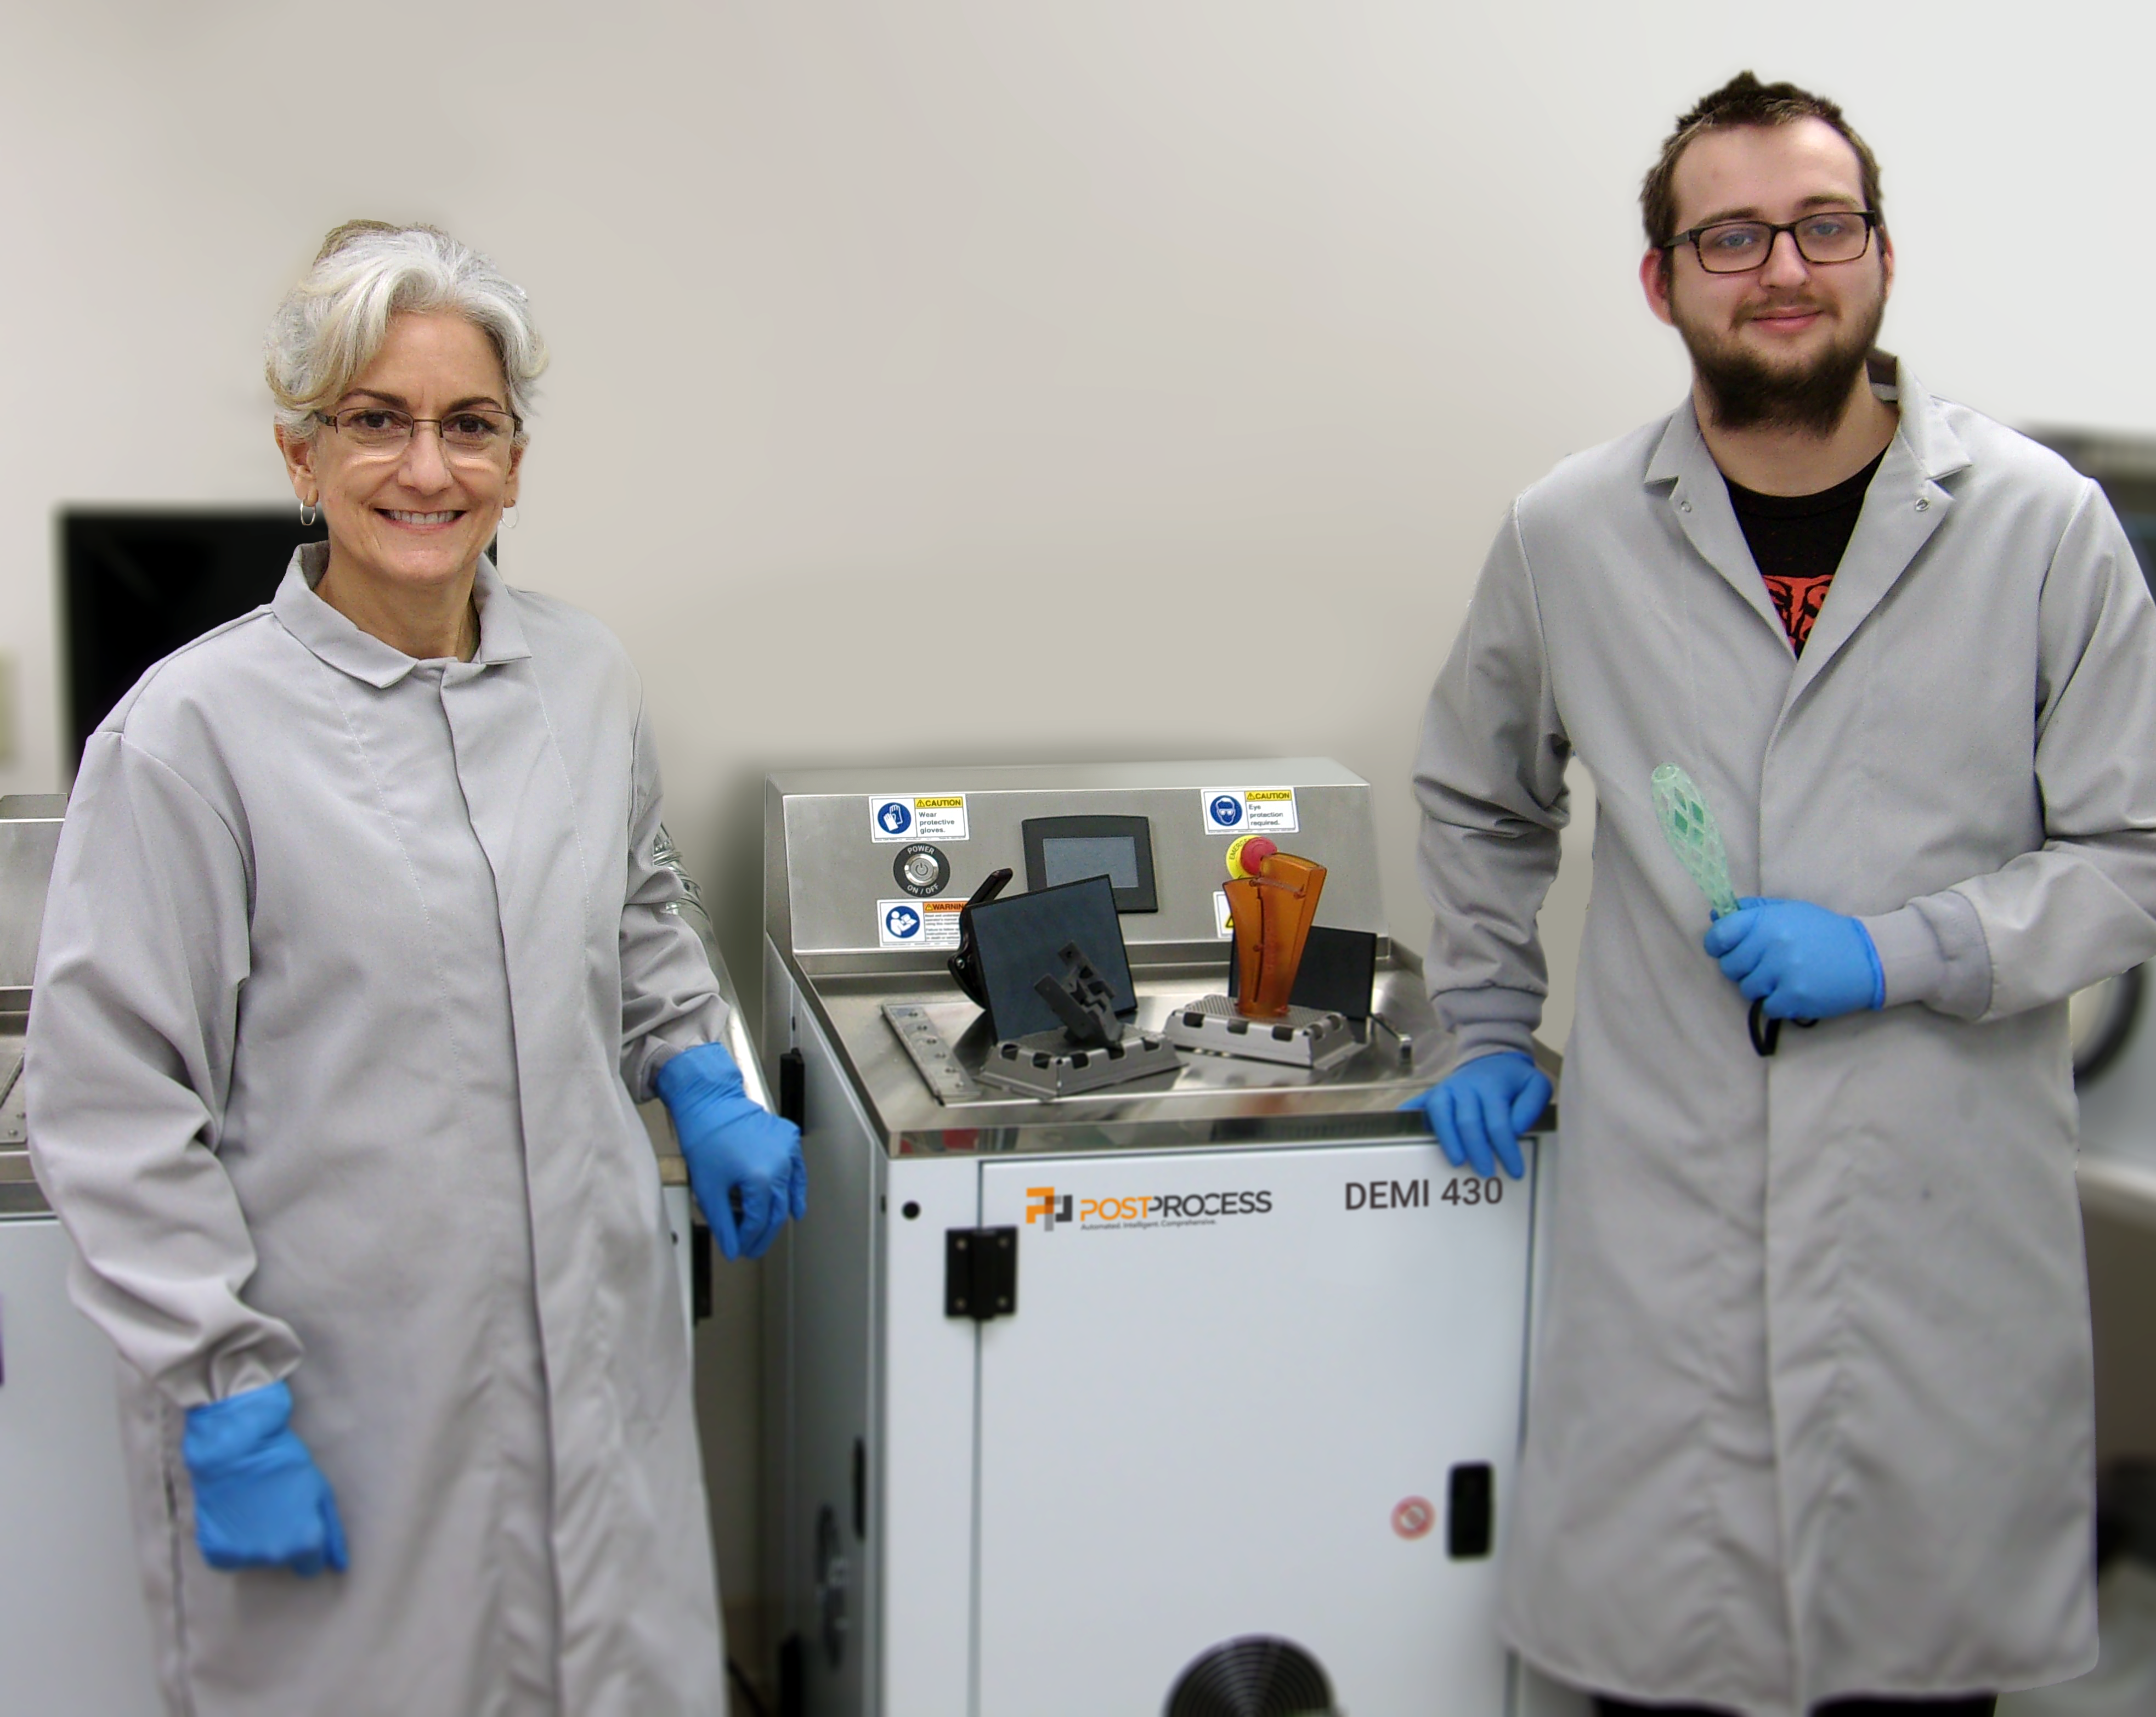 Primary Manufacturing lab technician Lisa Baker and engineering technician Gage Tift with the PostProcess DEMI 430 system. Photo via PostProcess Technologies.